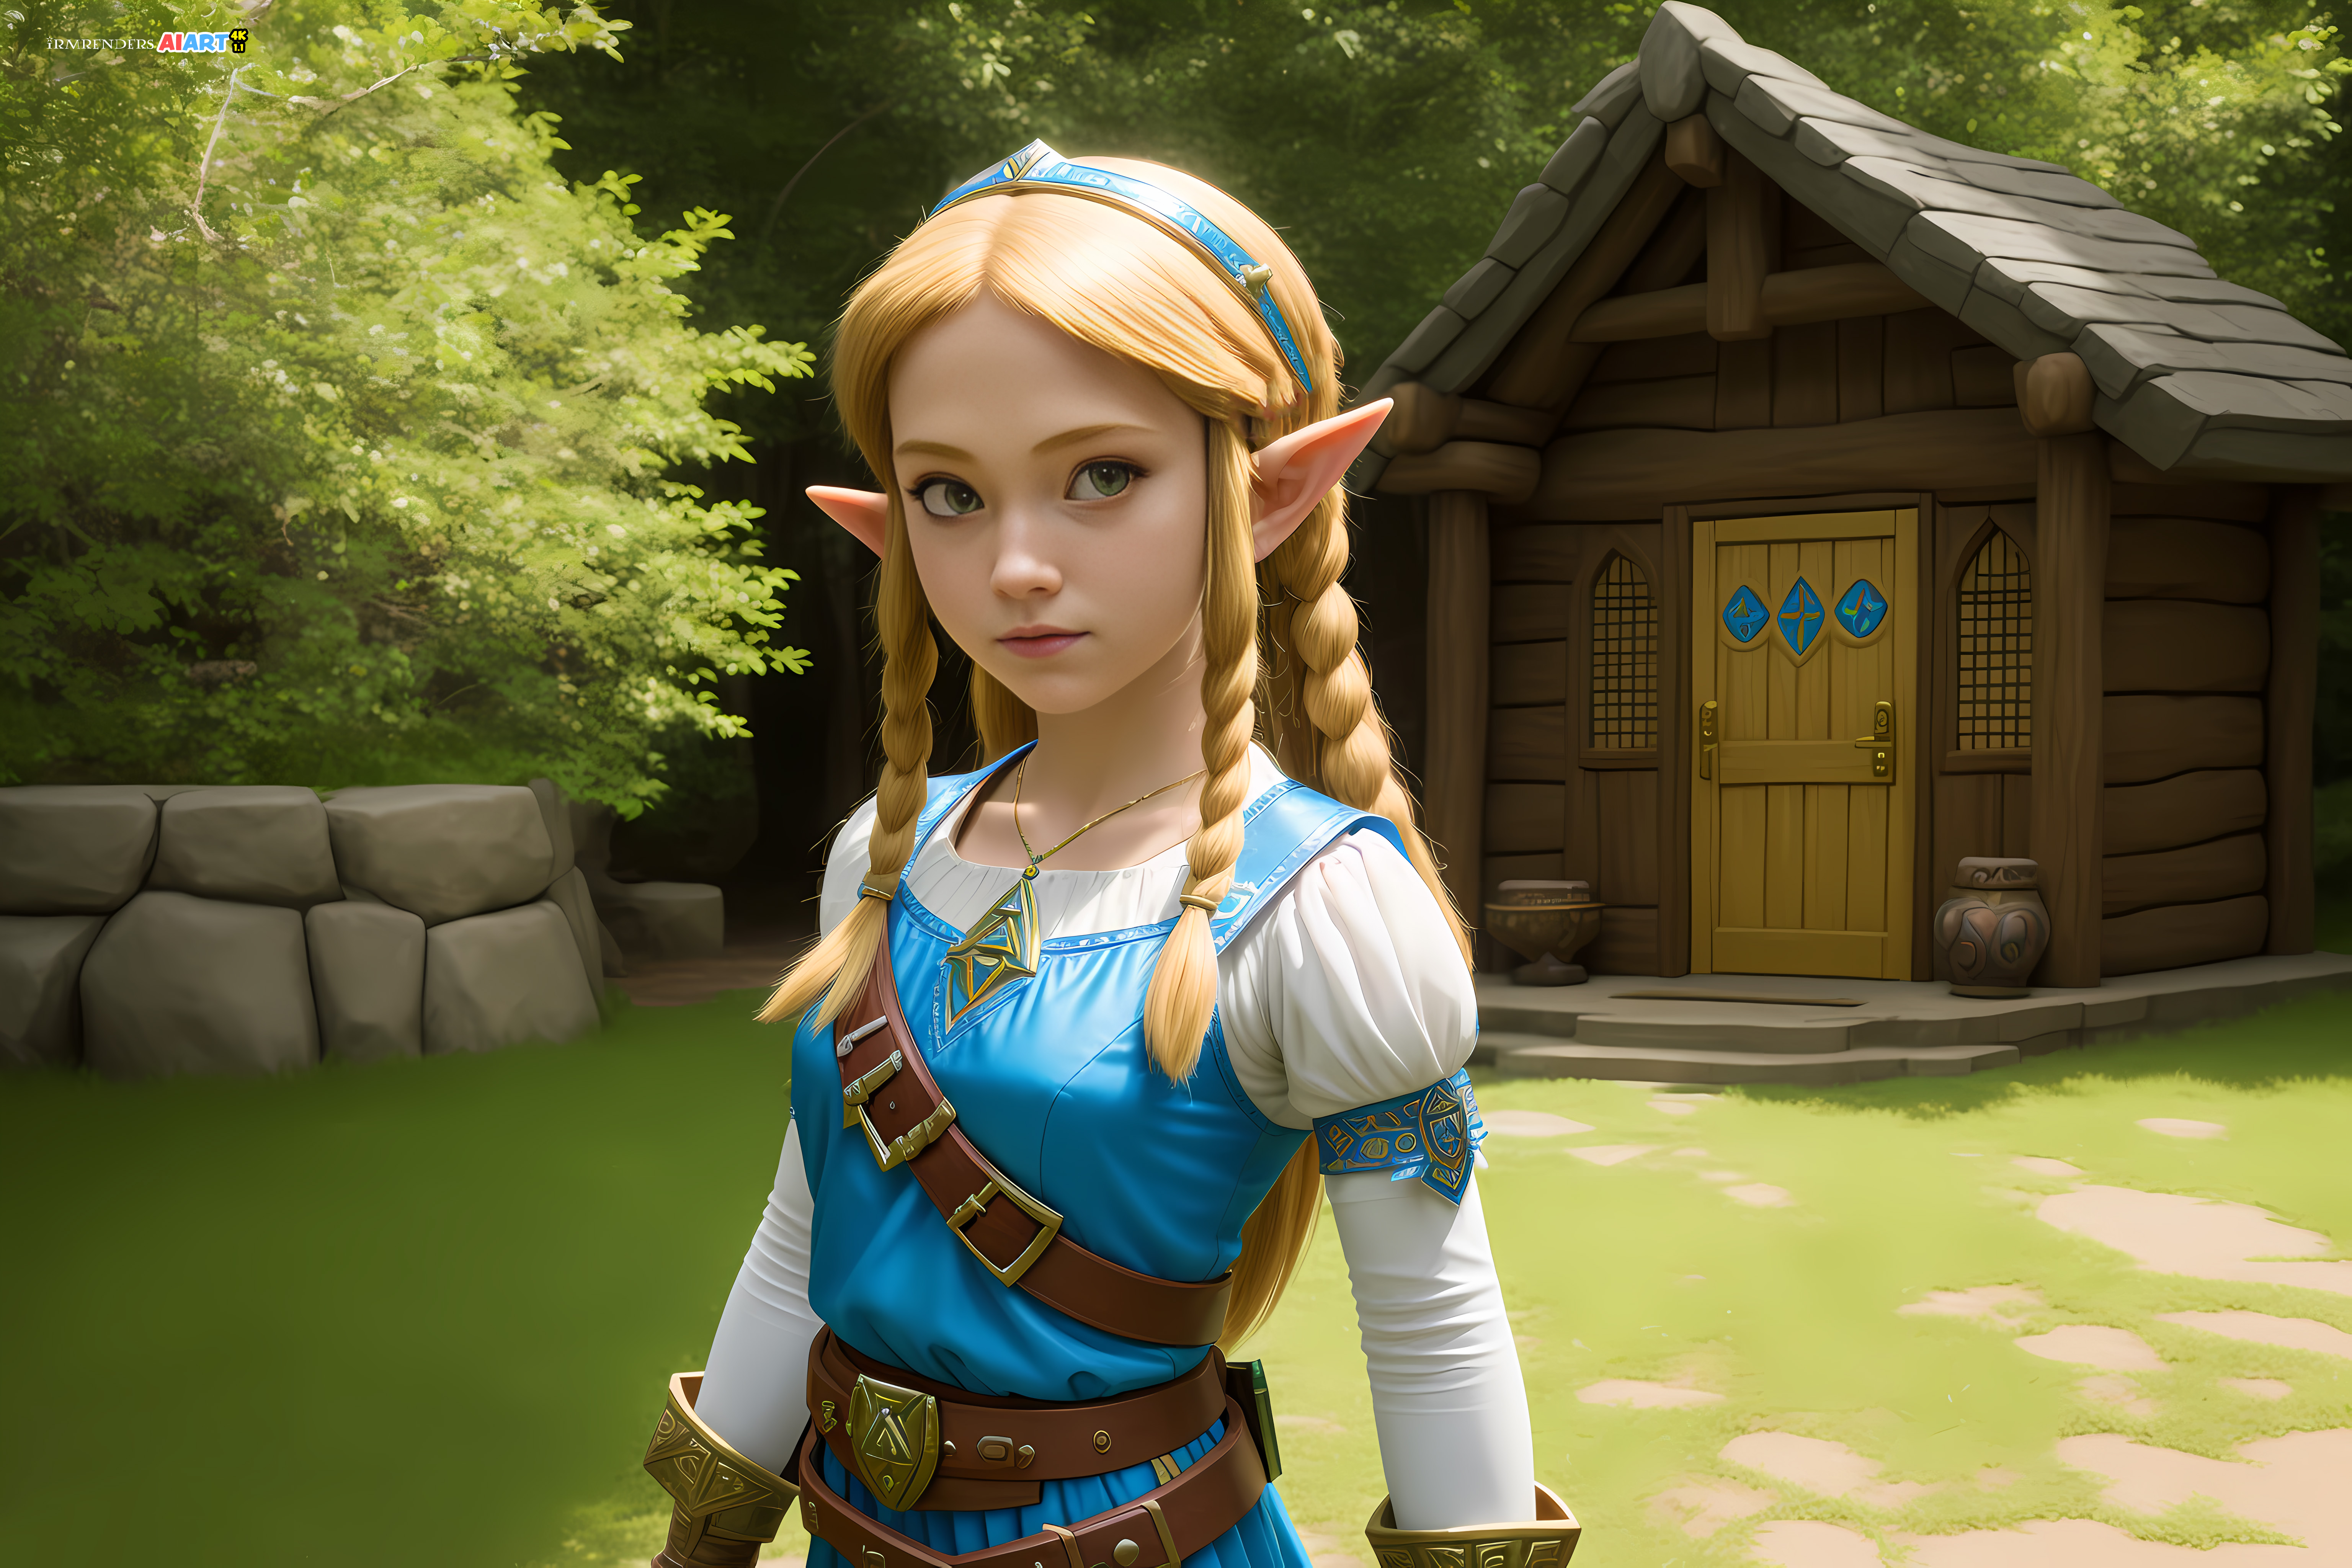 General 6144x4096 Zelda Zelda Breath of the Wild Nintendo blonde CGI AI art pointy ears braids trees shed sunlight grass video game girls video game characters